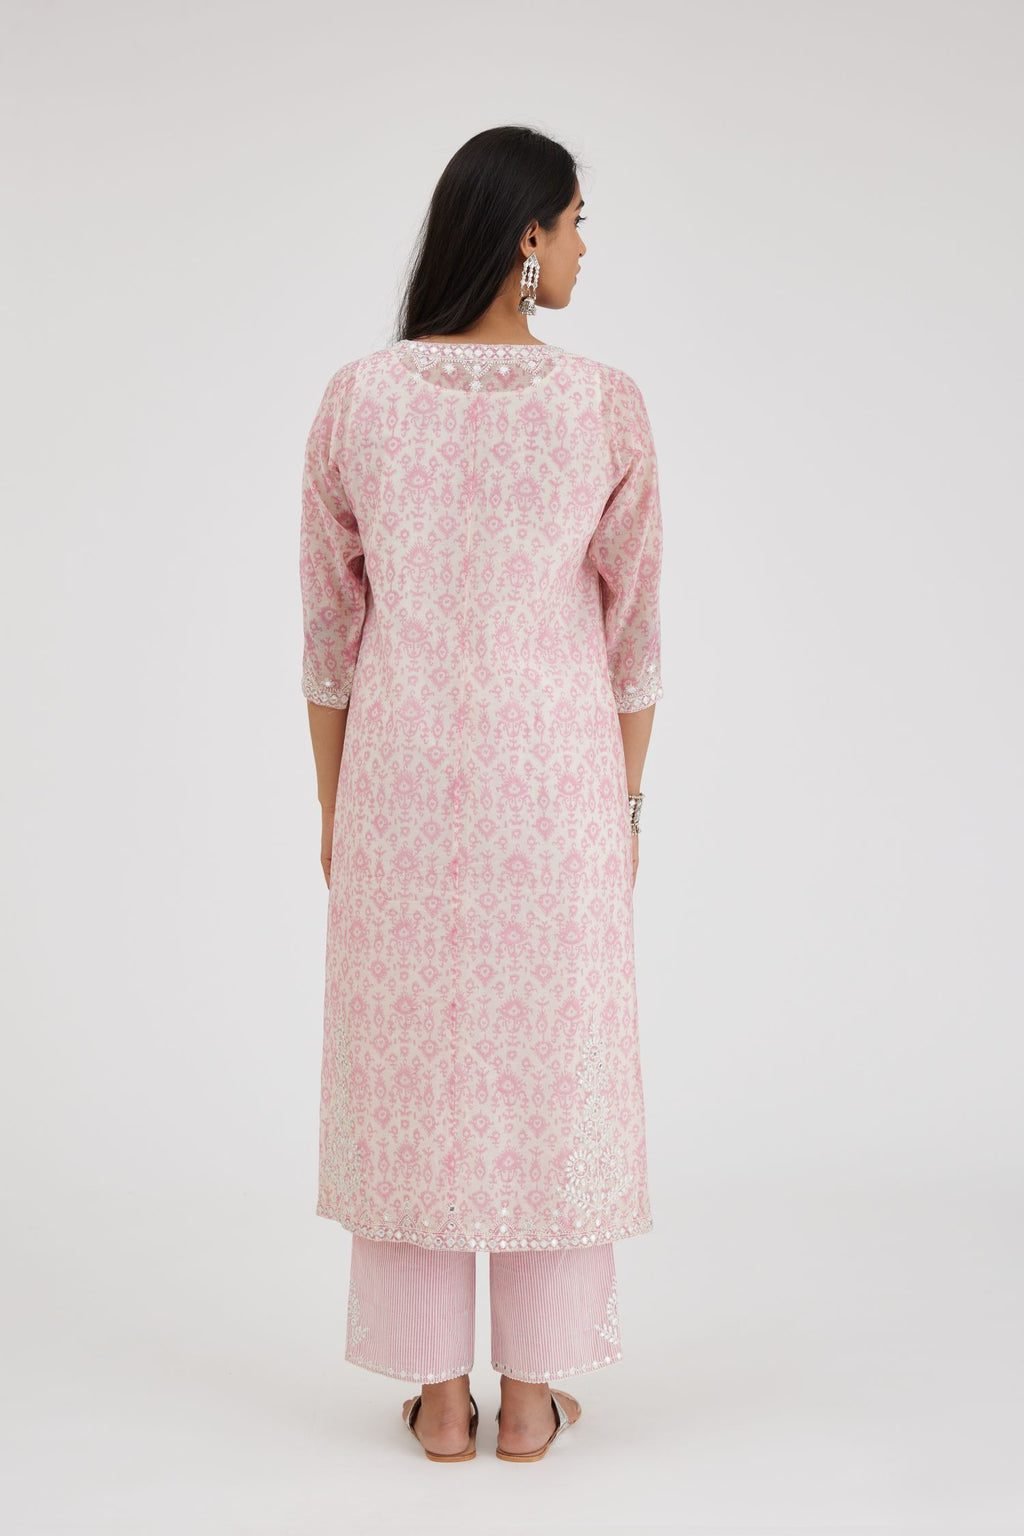 Ikat design pink and off white hand block-printed Cotton Chanderi straight long kurta set dress with off-white thread and mirror embroidery.